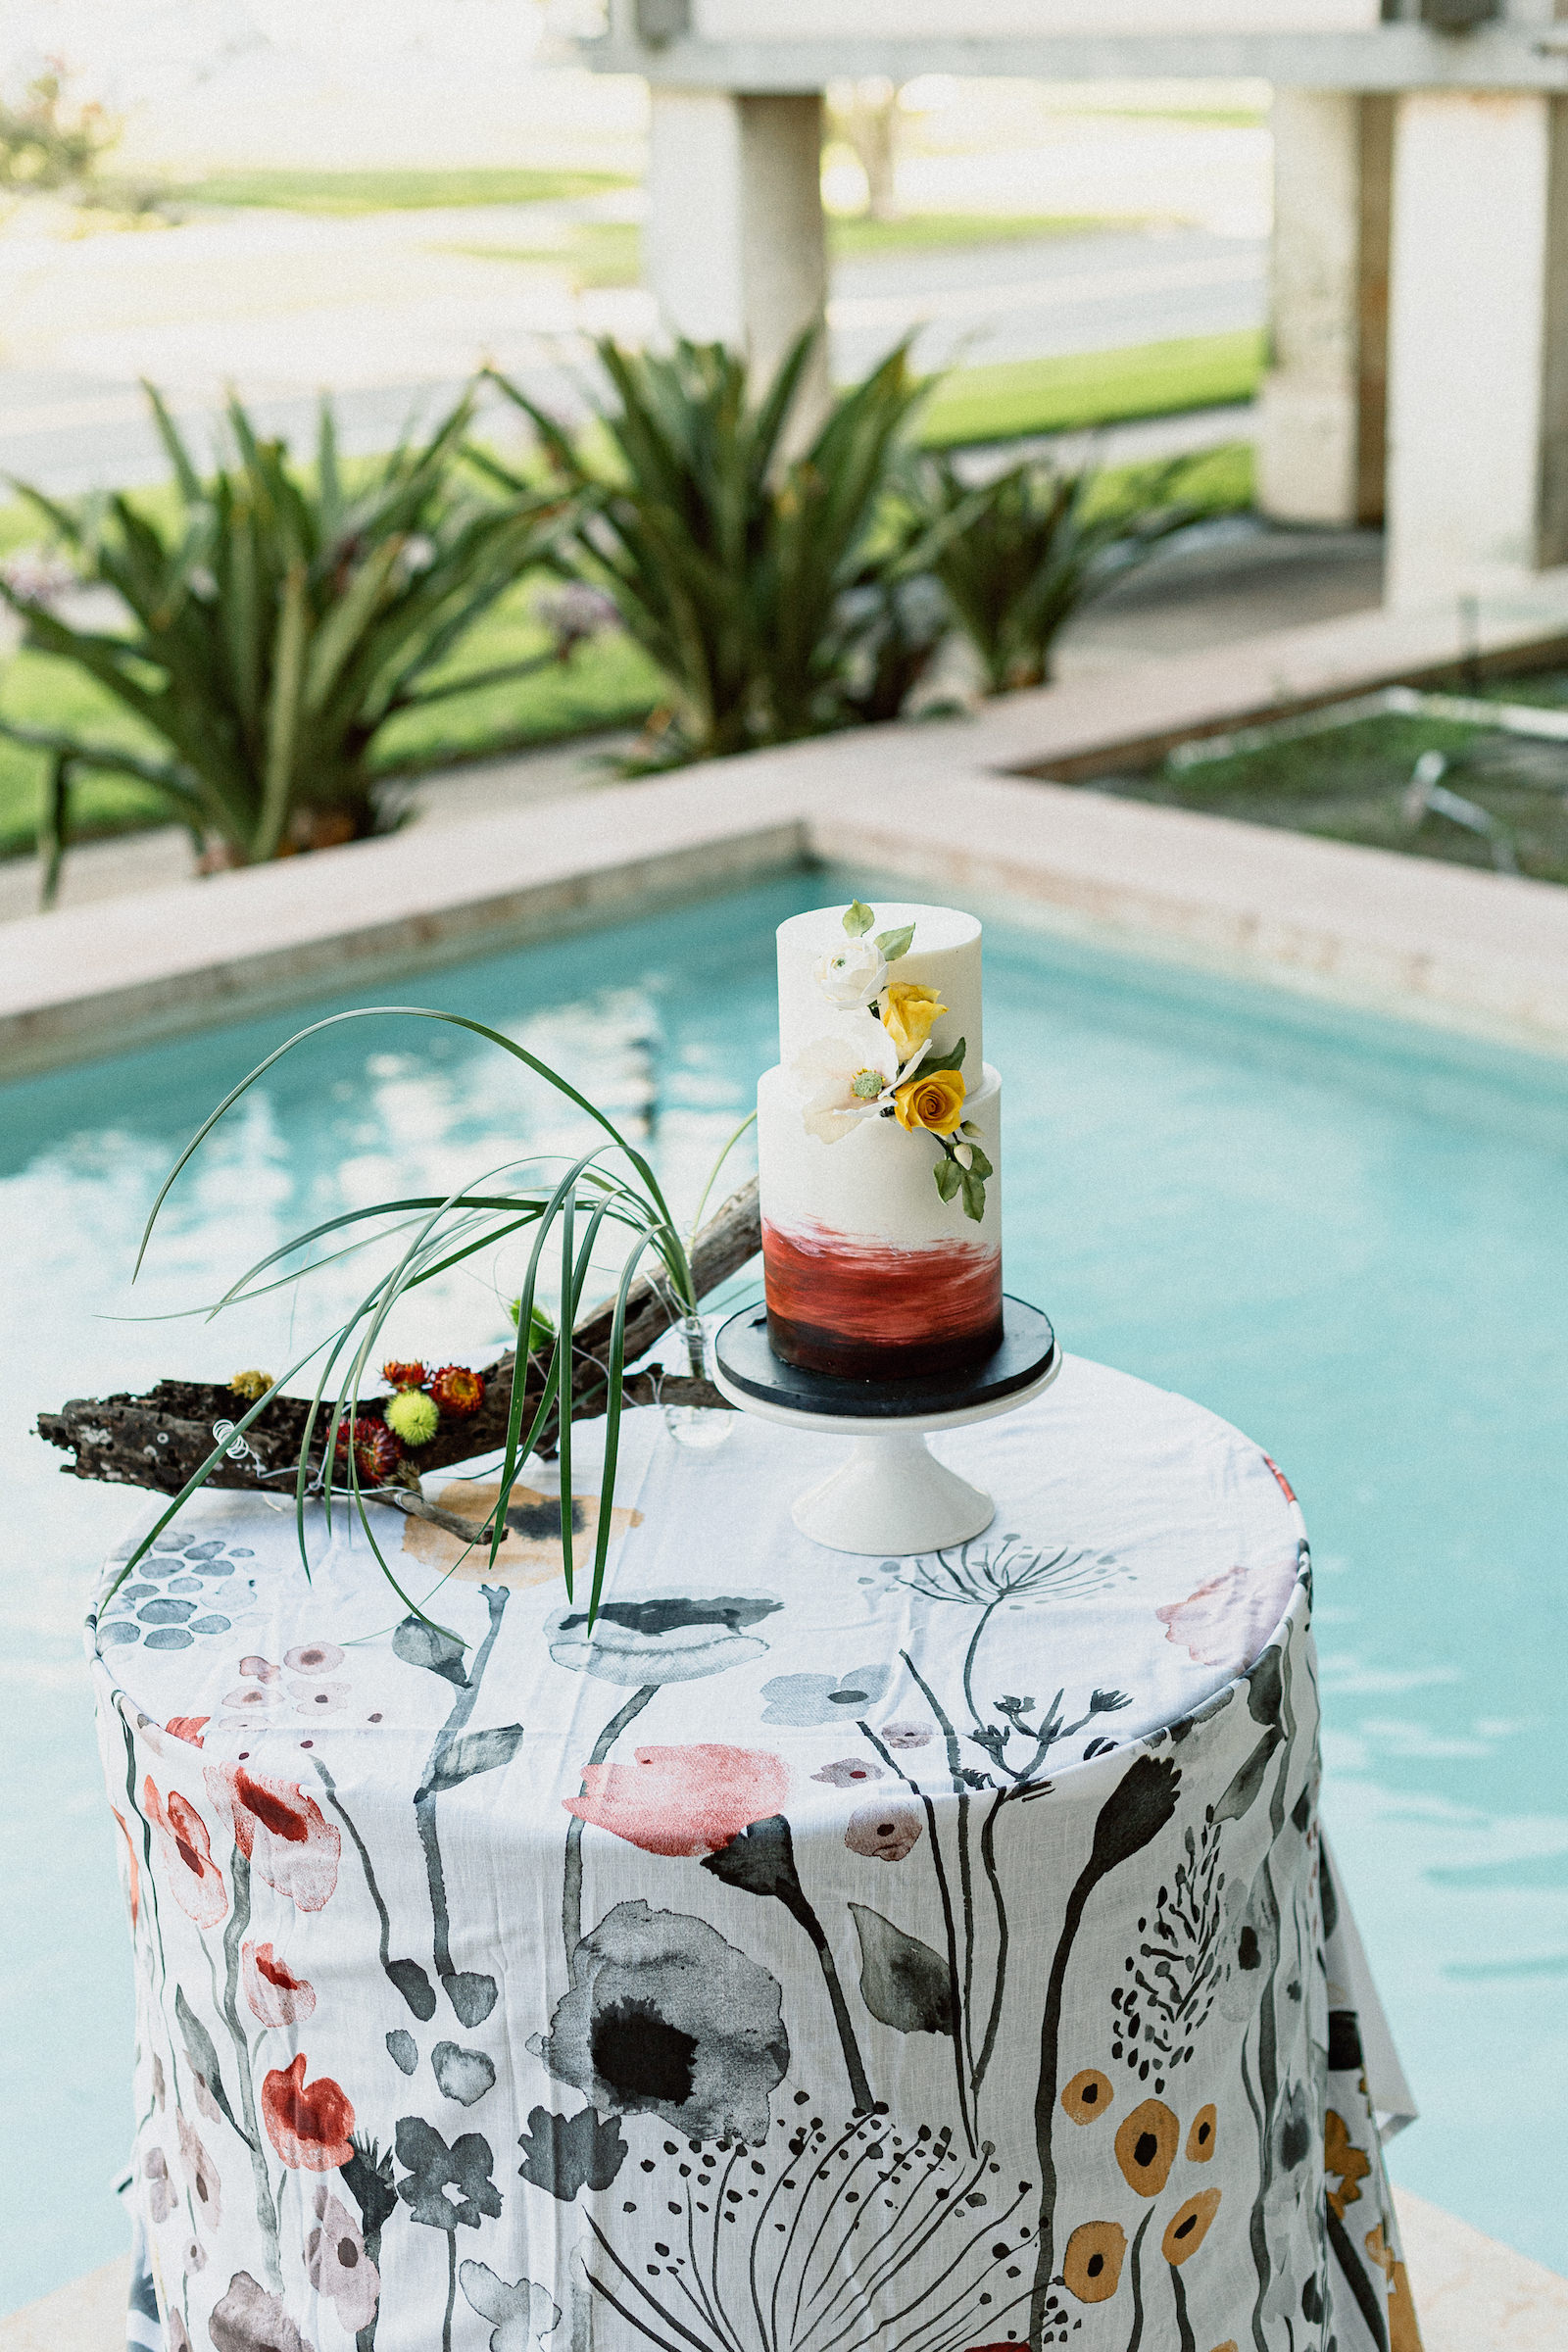 Unique Wedding Cake by Tampa Bay Cake Company | Black and White Wedding with Maroon Burgundy and Gold | Modern Wedding Cake Table with Floral Pattern Linen and Ikebana Asymmetrical Floral Arrangement by Tampa Wedding Florist Brides n Blooms | Watercolor Fondant Wedding Cake with Sugar Flower Roses